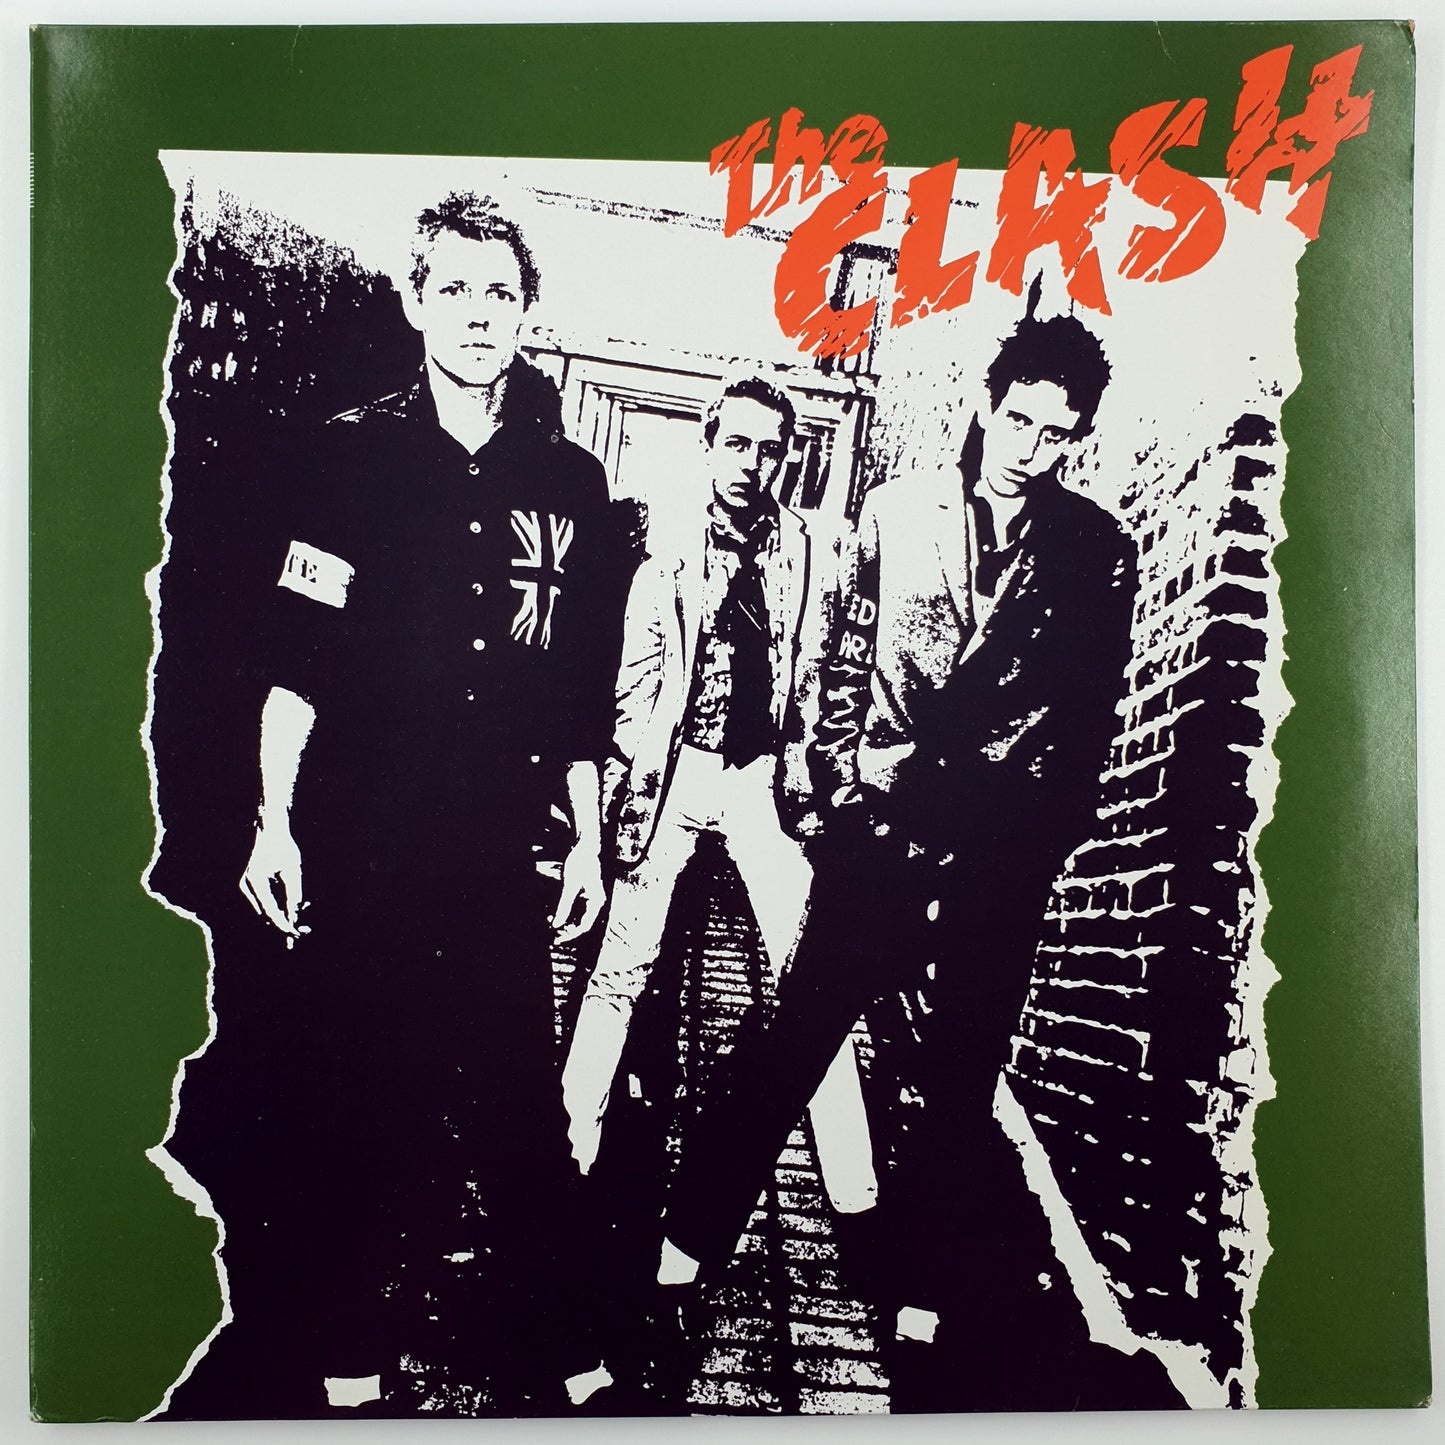 The Clash - Pearl Harbour '79